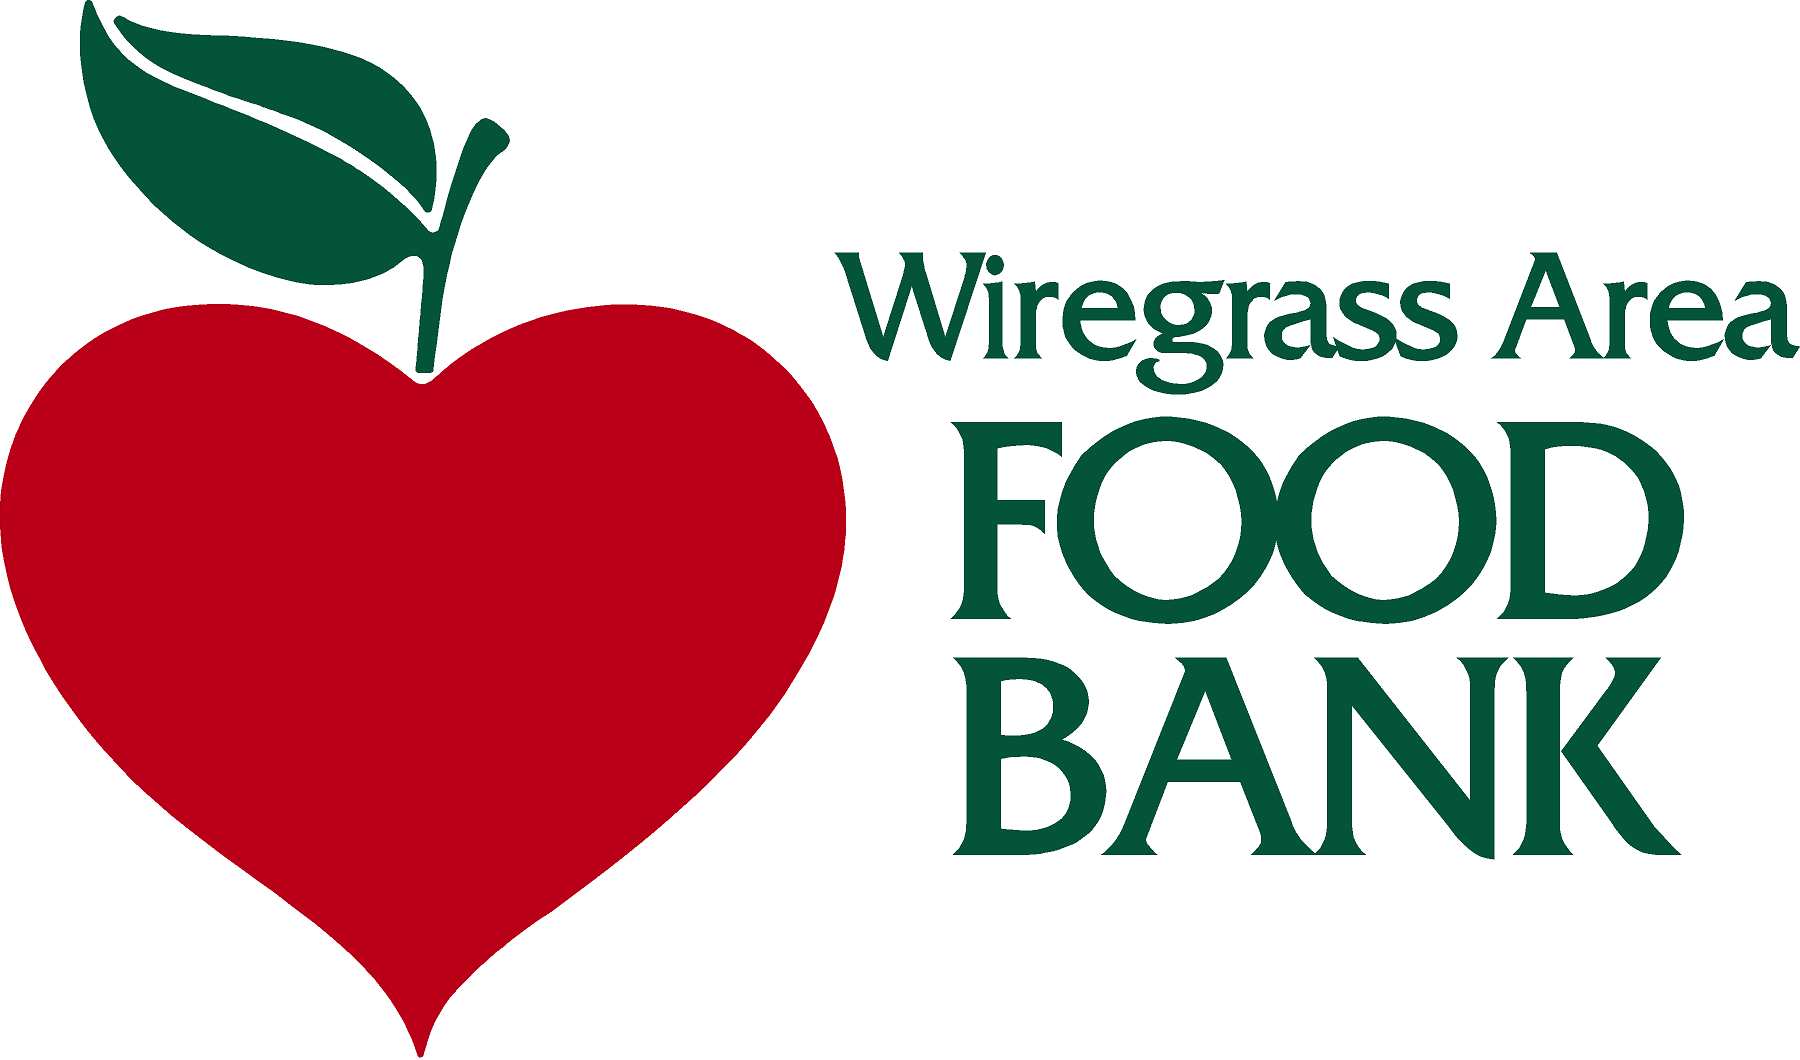 logo of wiregrass area food bank